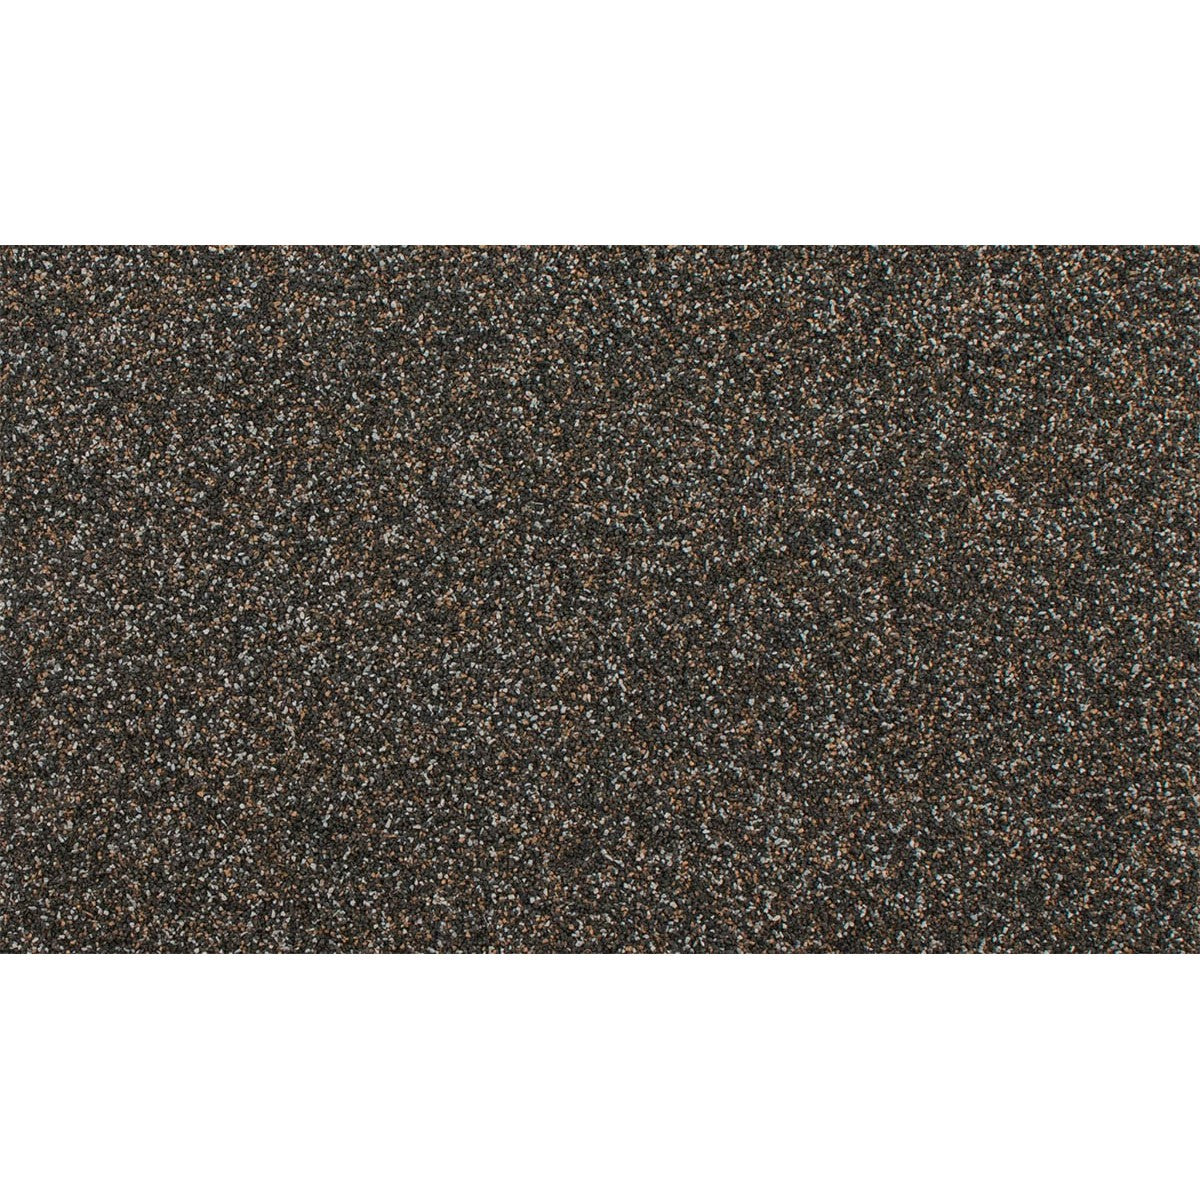 Sand - White Blend - This pre-blended granular material creates a dry, arid environment to your terrain feature, miniature base or gaming board